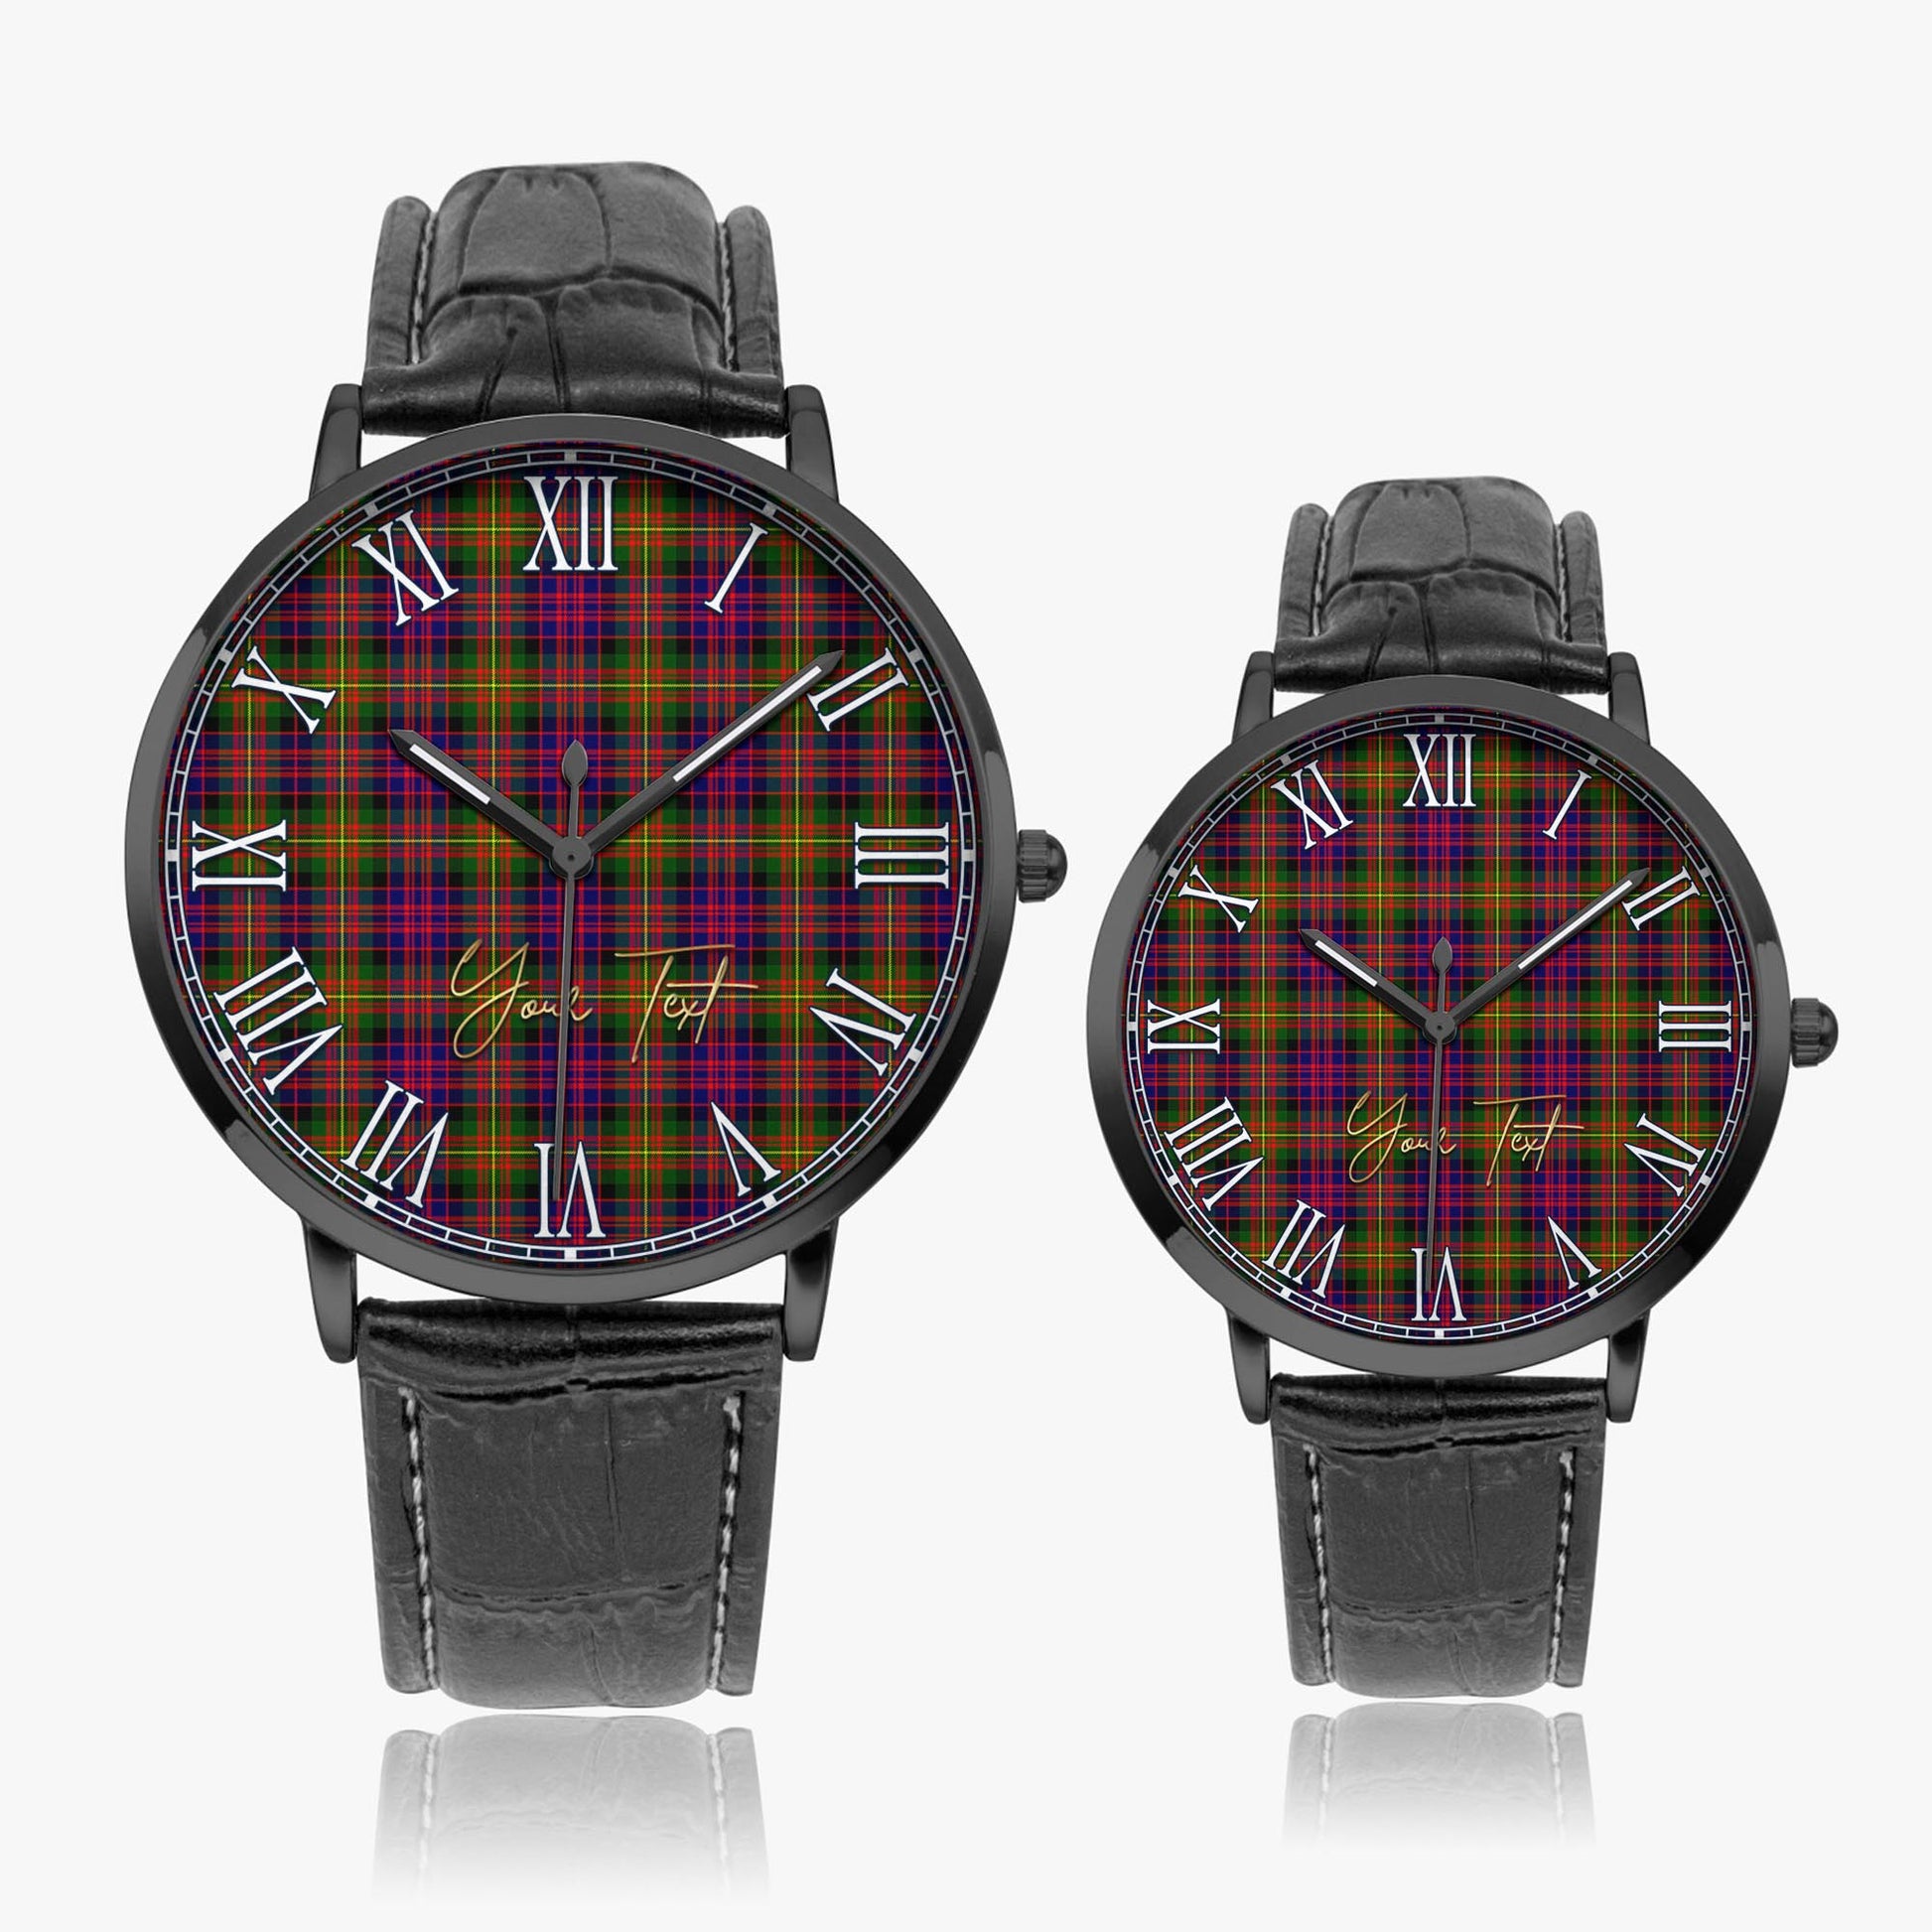 Carnegie Modern Tartan Personalized Your Text Leather Trap Quartz Watch Ultra Thin Black Case With Black Leather Strap - Tartanvibesclothing